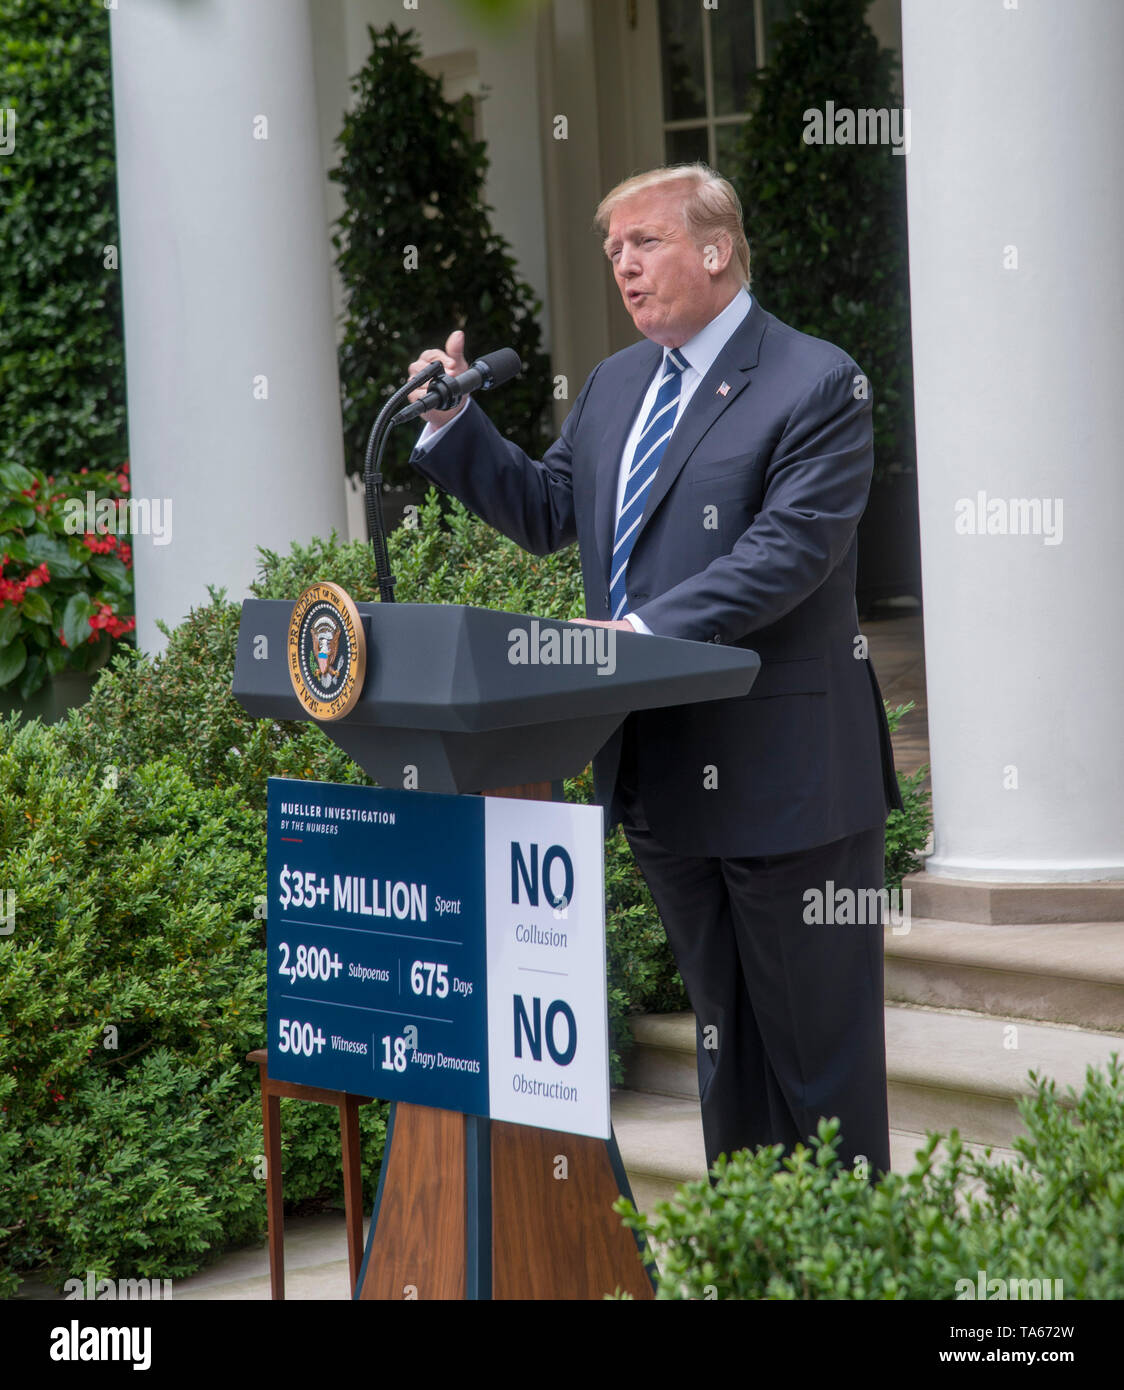 Washington DC, May 22, 2019, USA: President Donald J Trump holds an impromptu press conference in the White House Rose garden to condemn the on-going investigation after the Muller report was released. Patsy Lynch Stock Photo